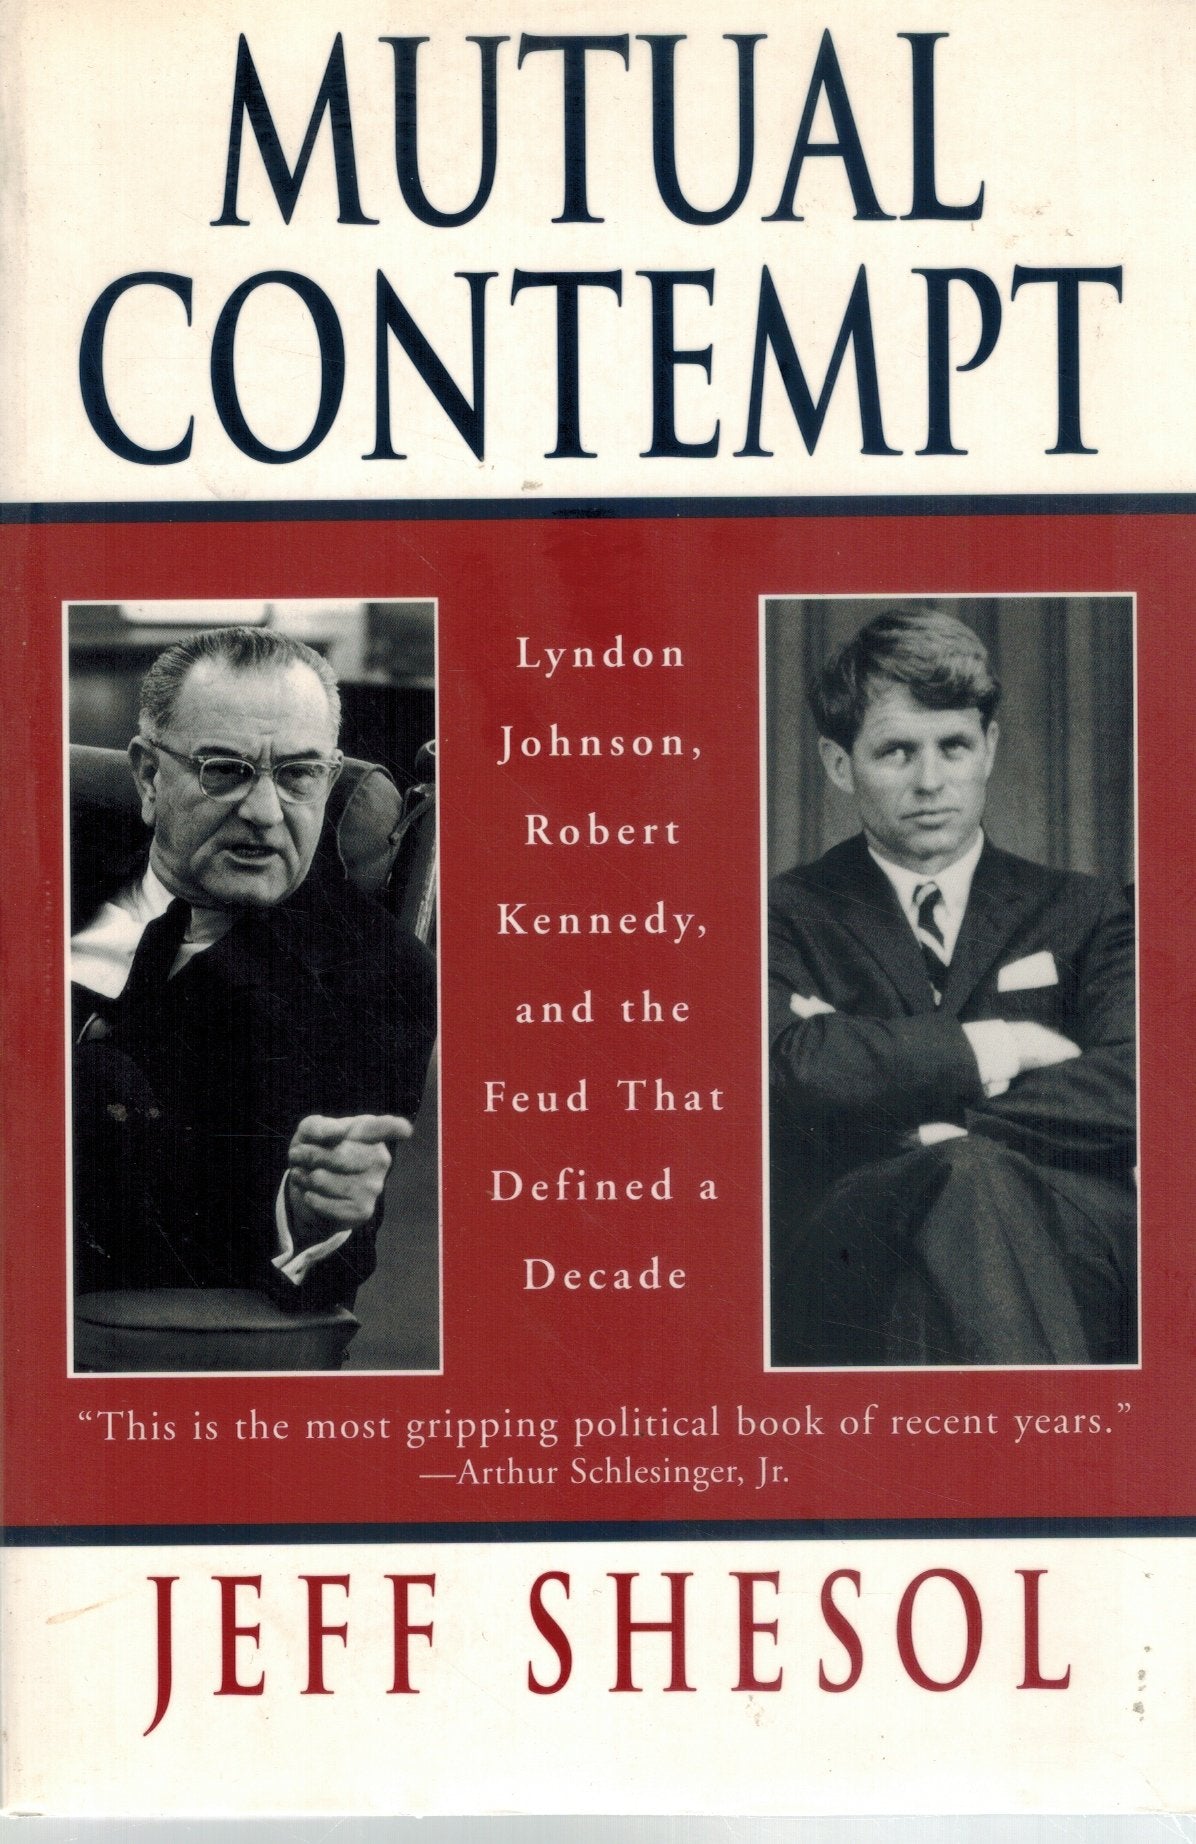 MUTUAL CONTEMPT Lyndon Johnson, Robert Kennedy, and the Feud That Defined  a Decade  by Shesol, Jeff